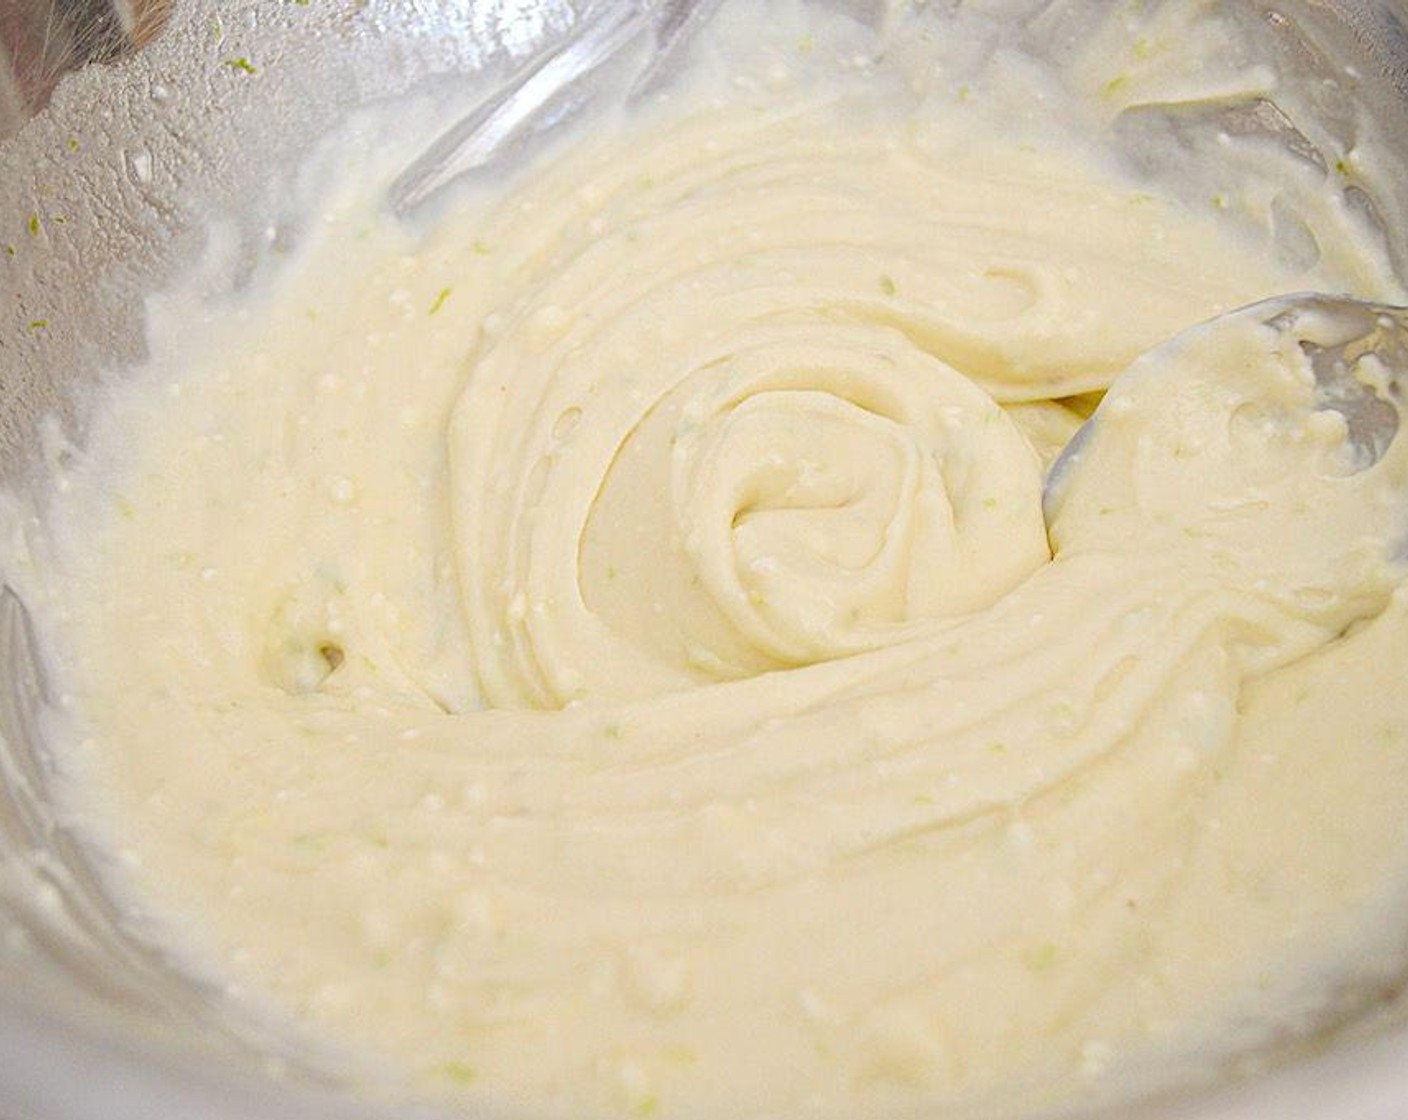 step 4 While it freezes, make the filling. Stir the Philadelphia Original Soft Cheese (2 cups), PATRÓN® Silver Tequila (3 Tbsp), Limes (2), Granulated Sugar (1 cup), Sea Salt (1 tsp) and Vanilla Extract (1/2 tsp) together until smooth and luscious.